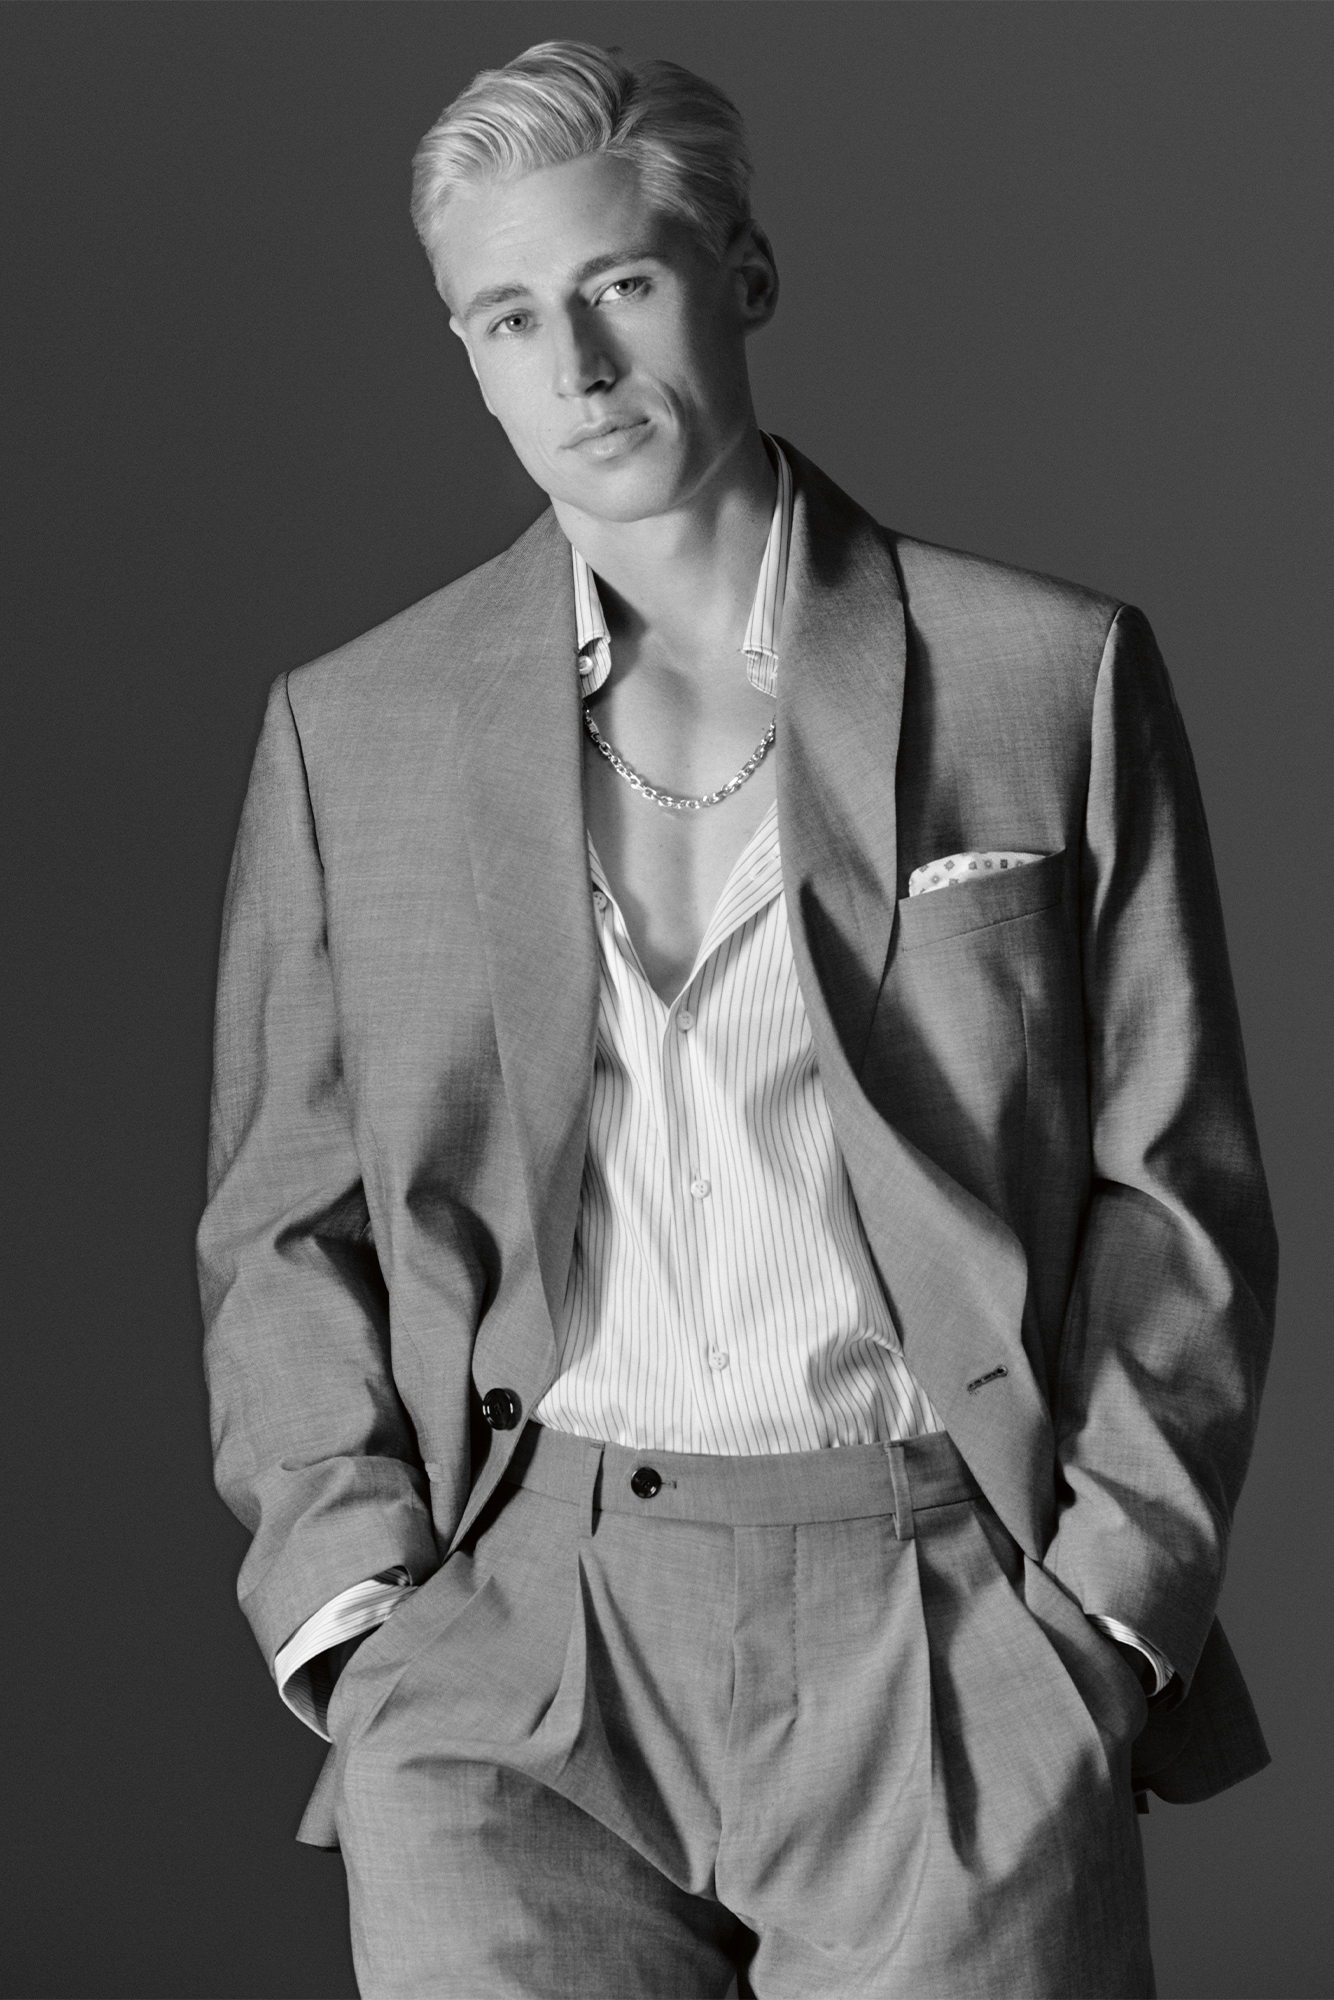 Male model in black and white with hands in suit pockets, half buttoned white shirt and suit jacket